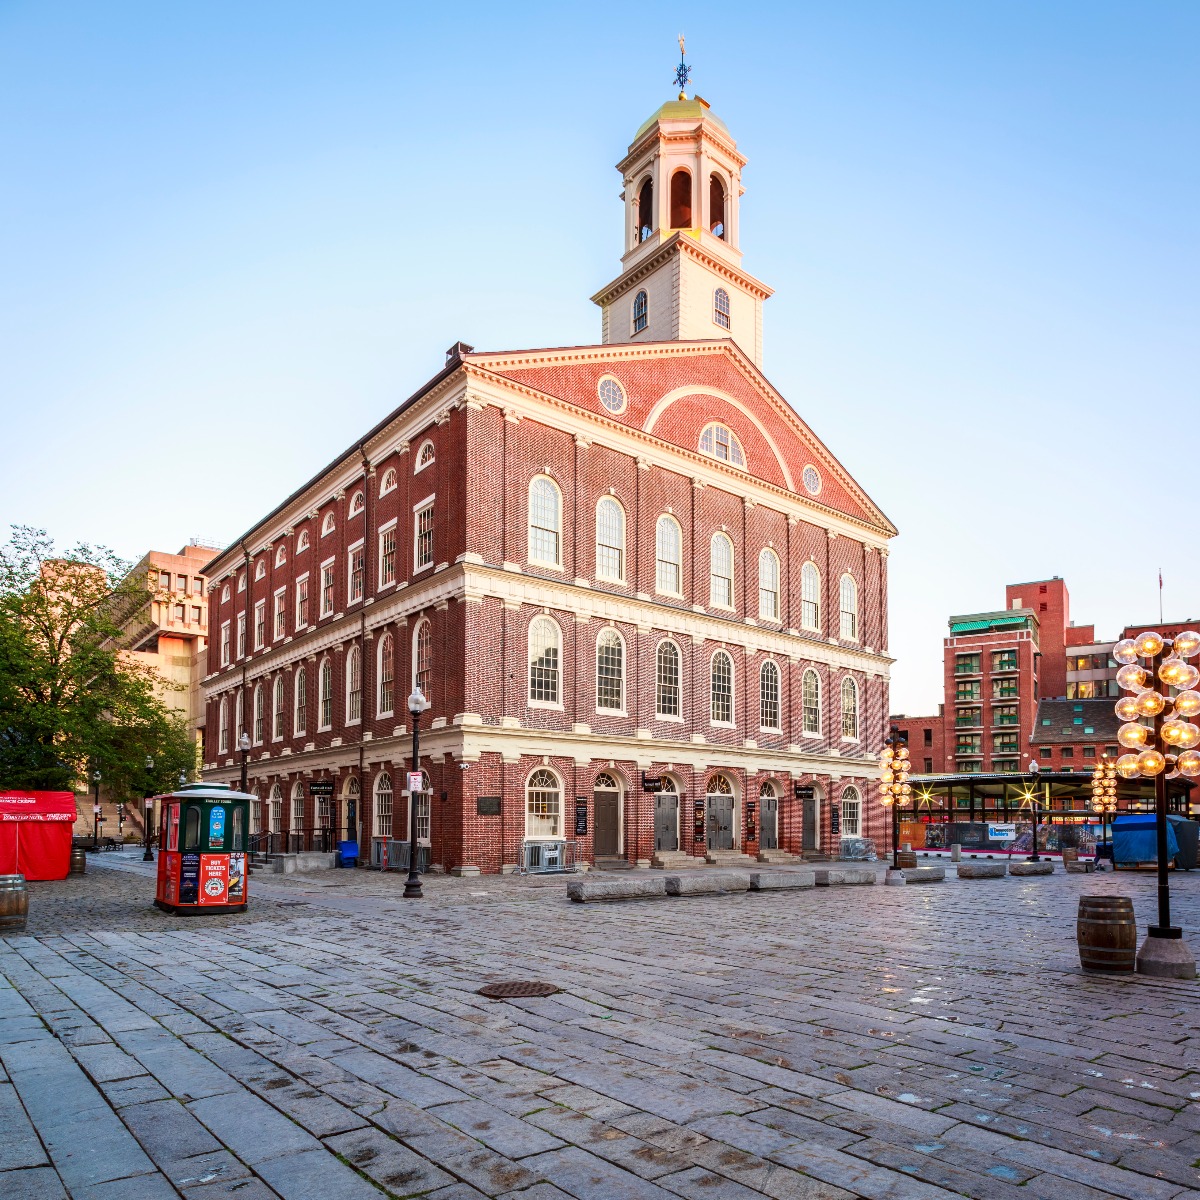 The Faneuil Hall and Quincy Market in Boston, MA, USA.
